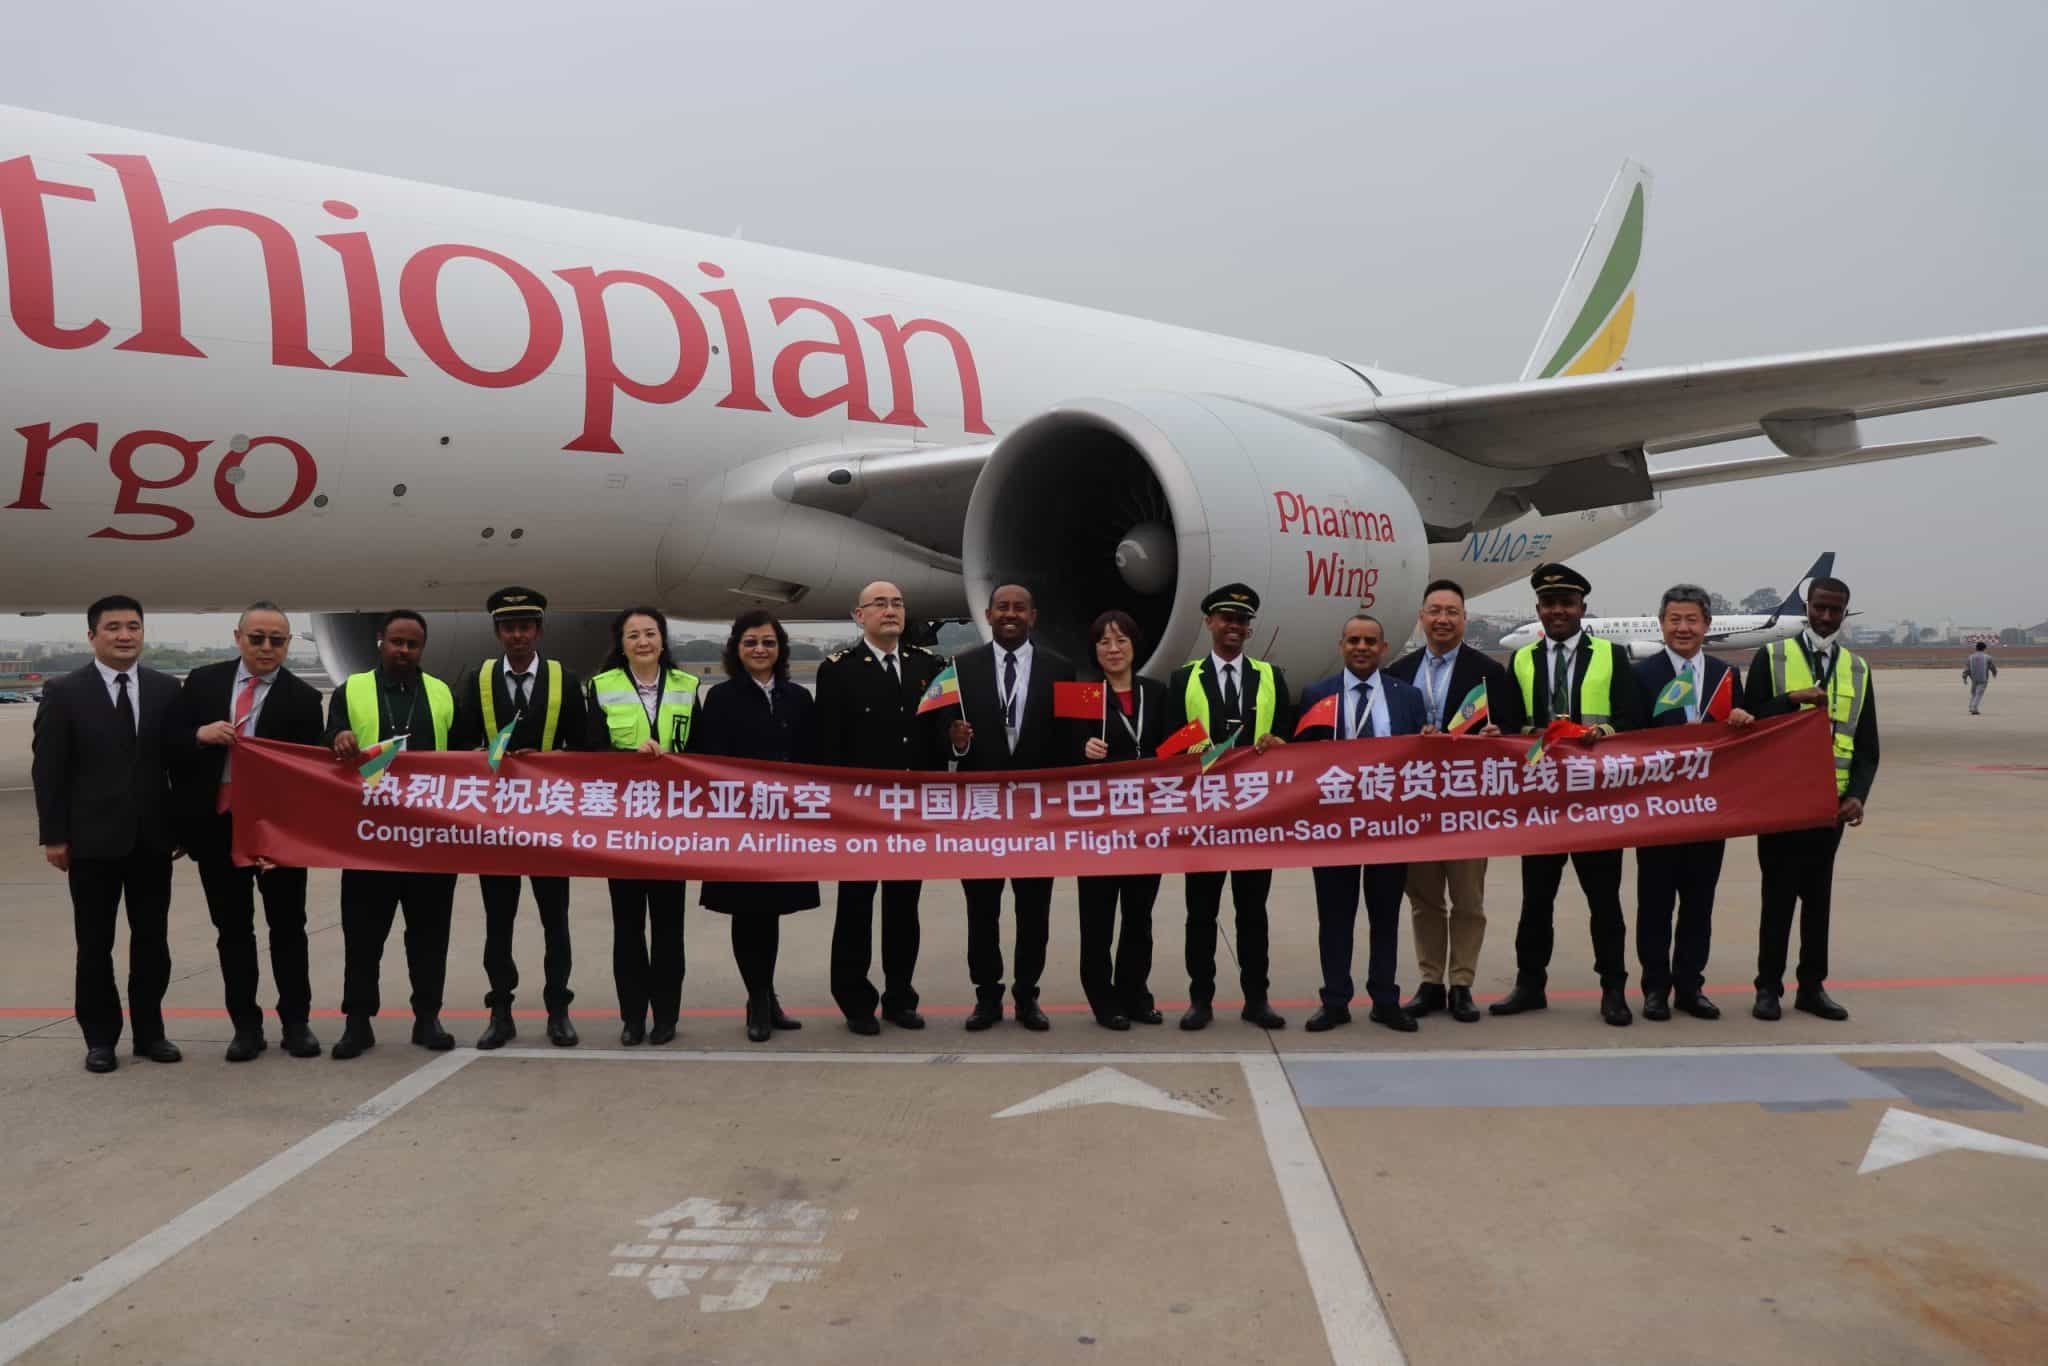 Xiamen, China launched a new air cargo route to Brazil on Thursday